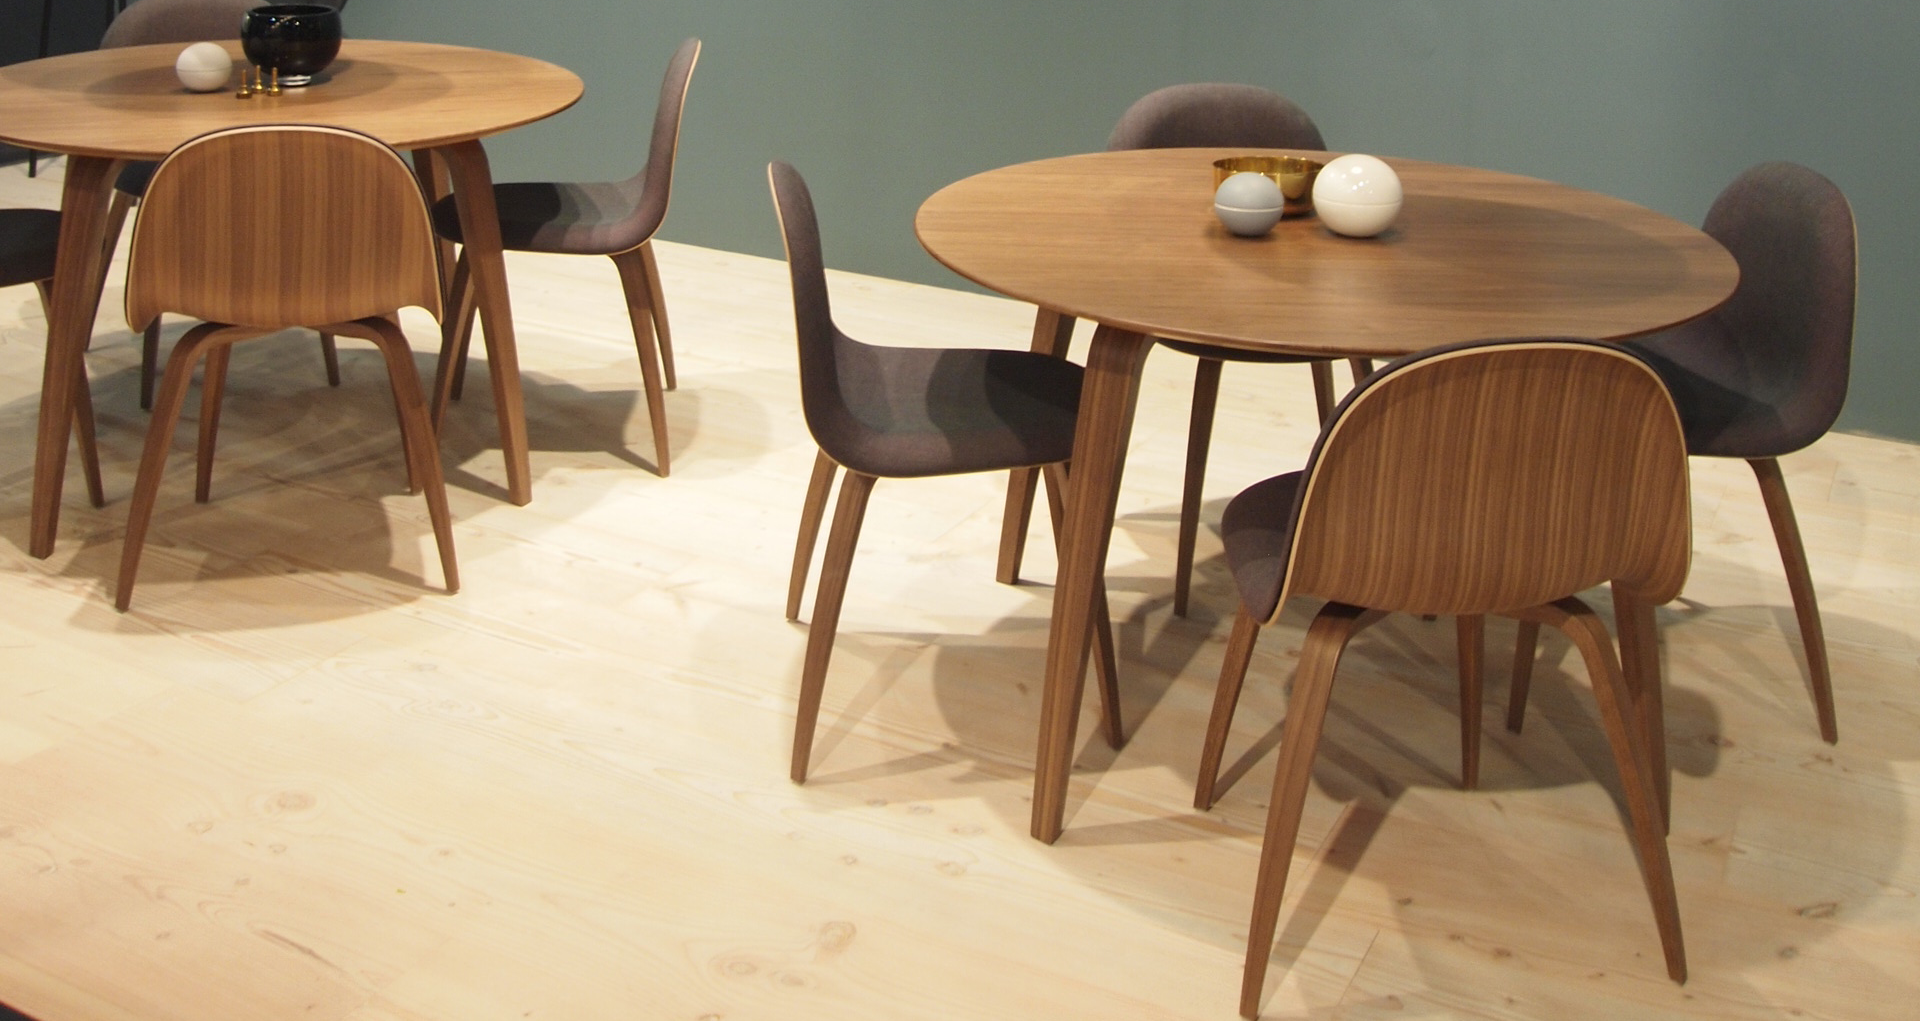 Gubi Round Dining Table Walnut 120cm Minimalist With An Organic Expression, The Gubi Round Dining